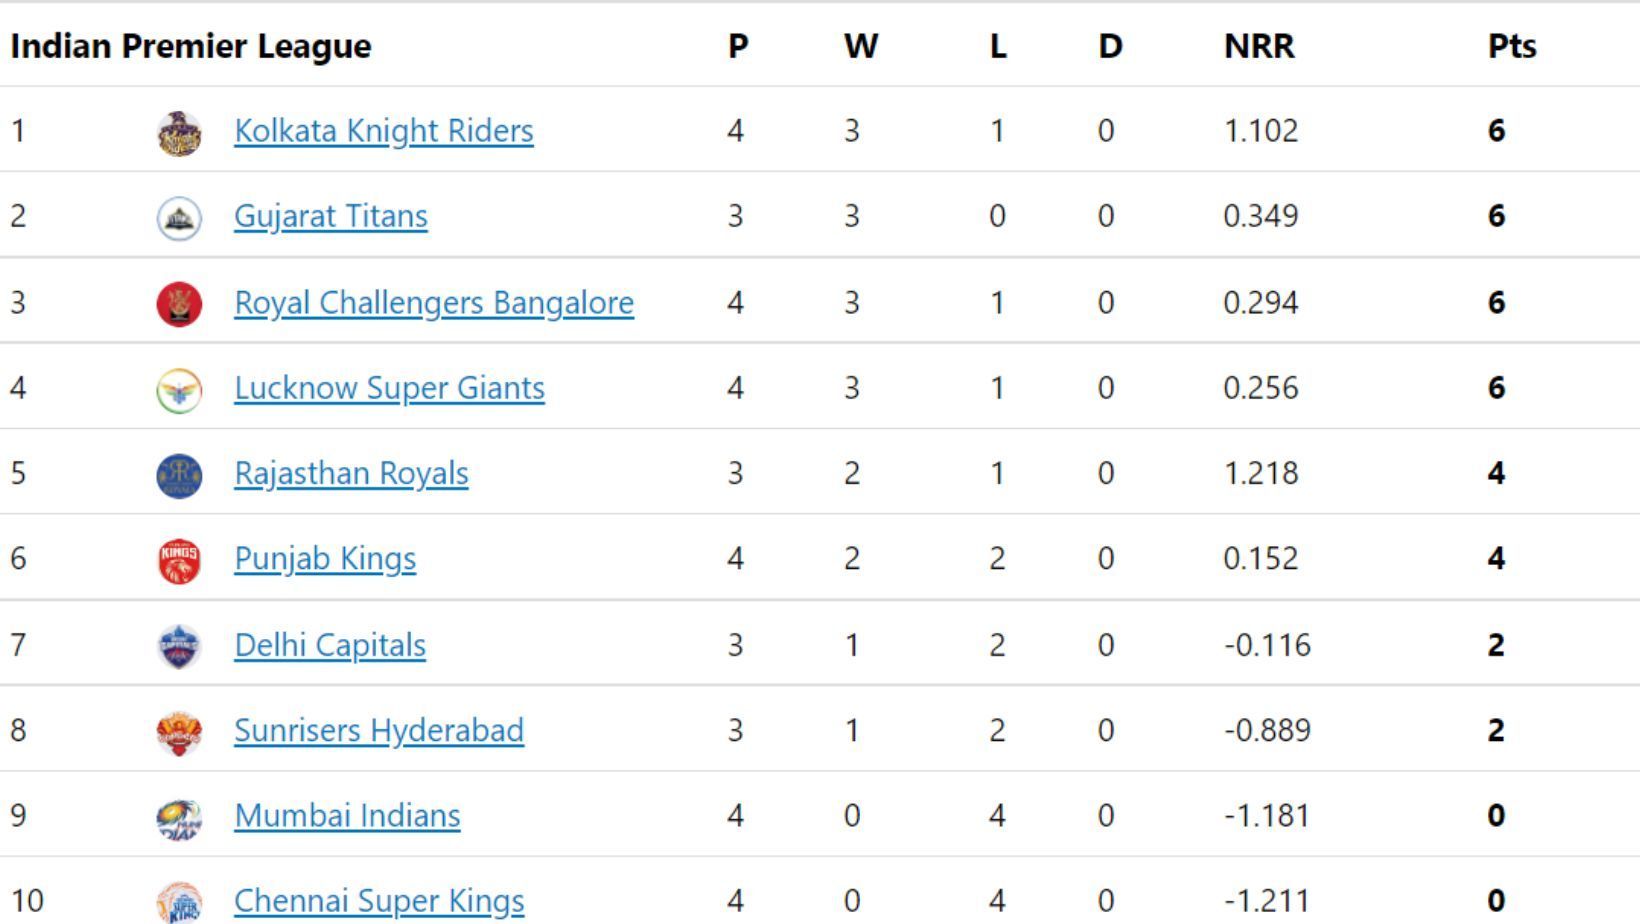 RCB enters the top three of the IPL 2022 points table.